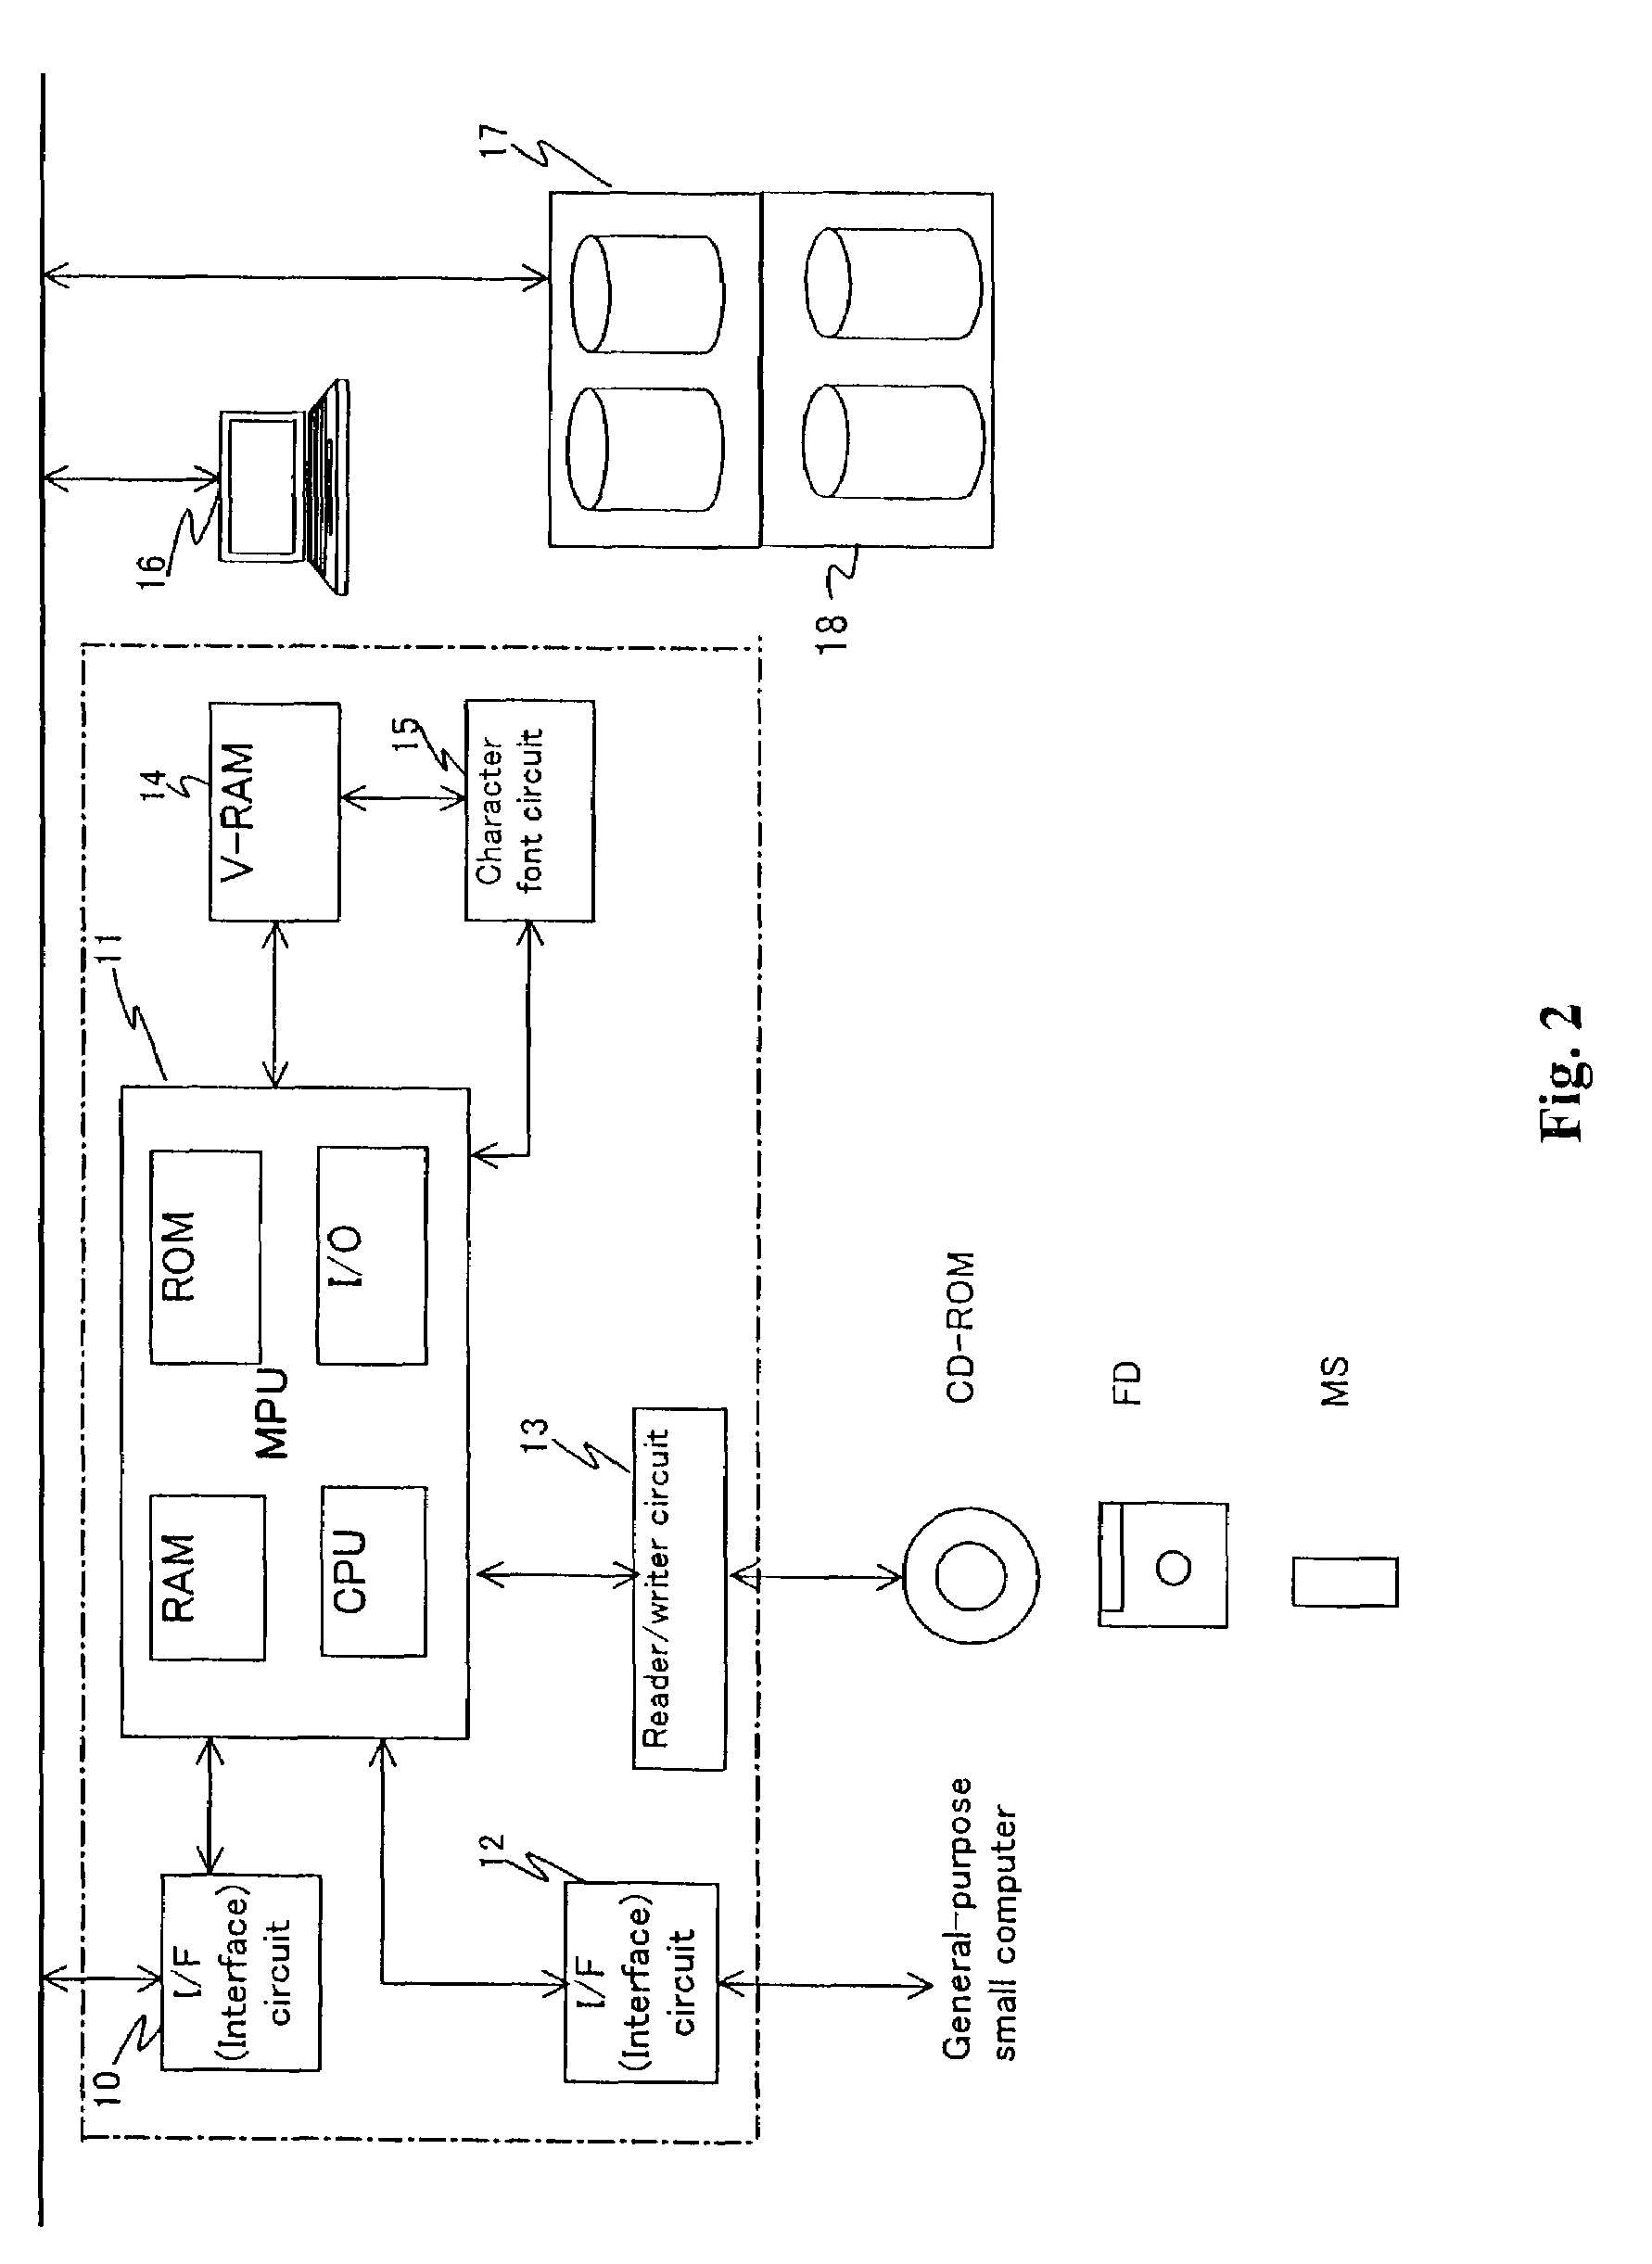 Method for offering multilingual information translated in many languages through a communication network